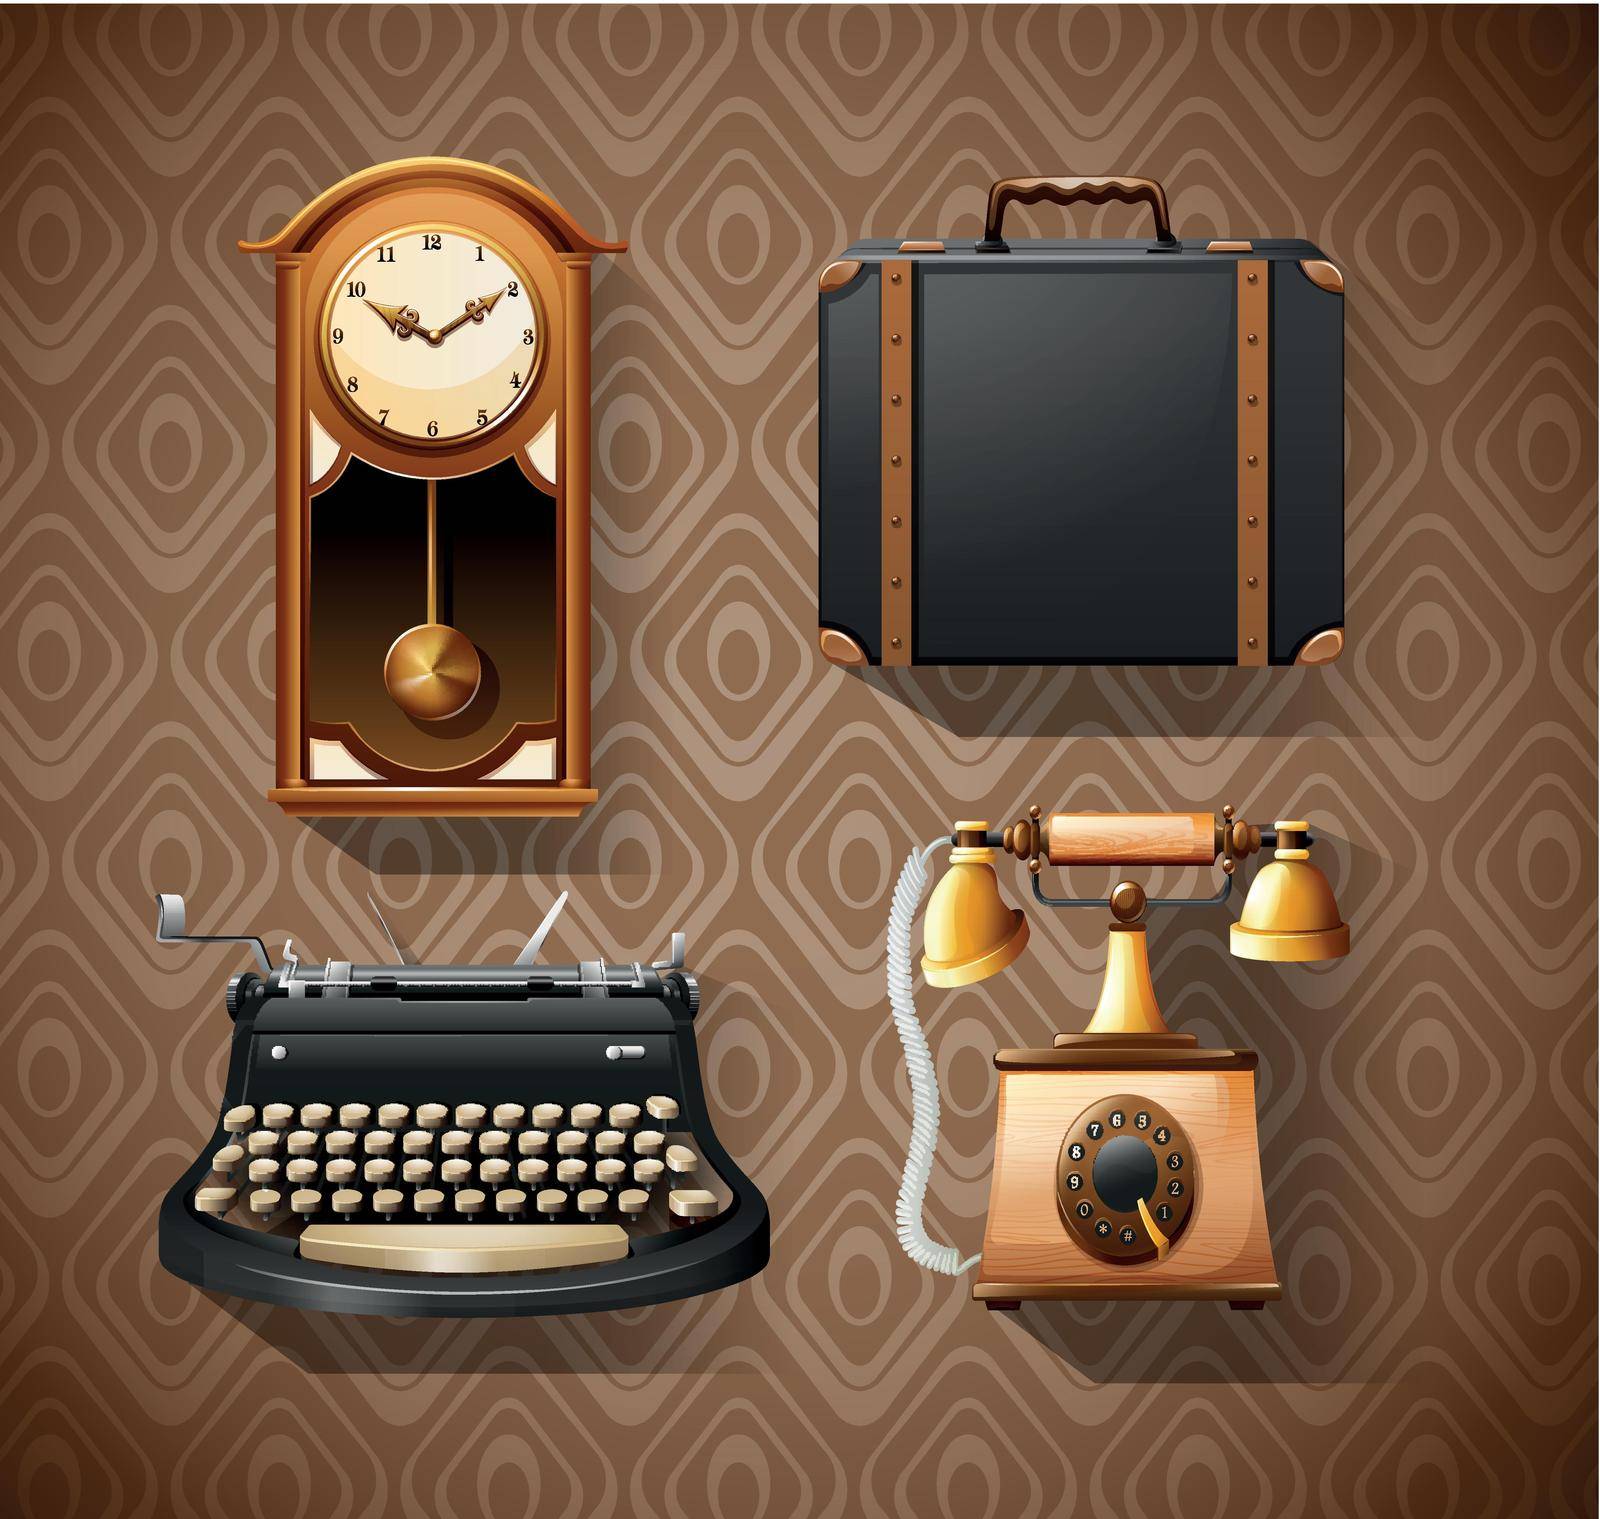 Household objects in vintage styles illustration